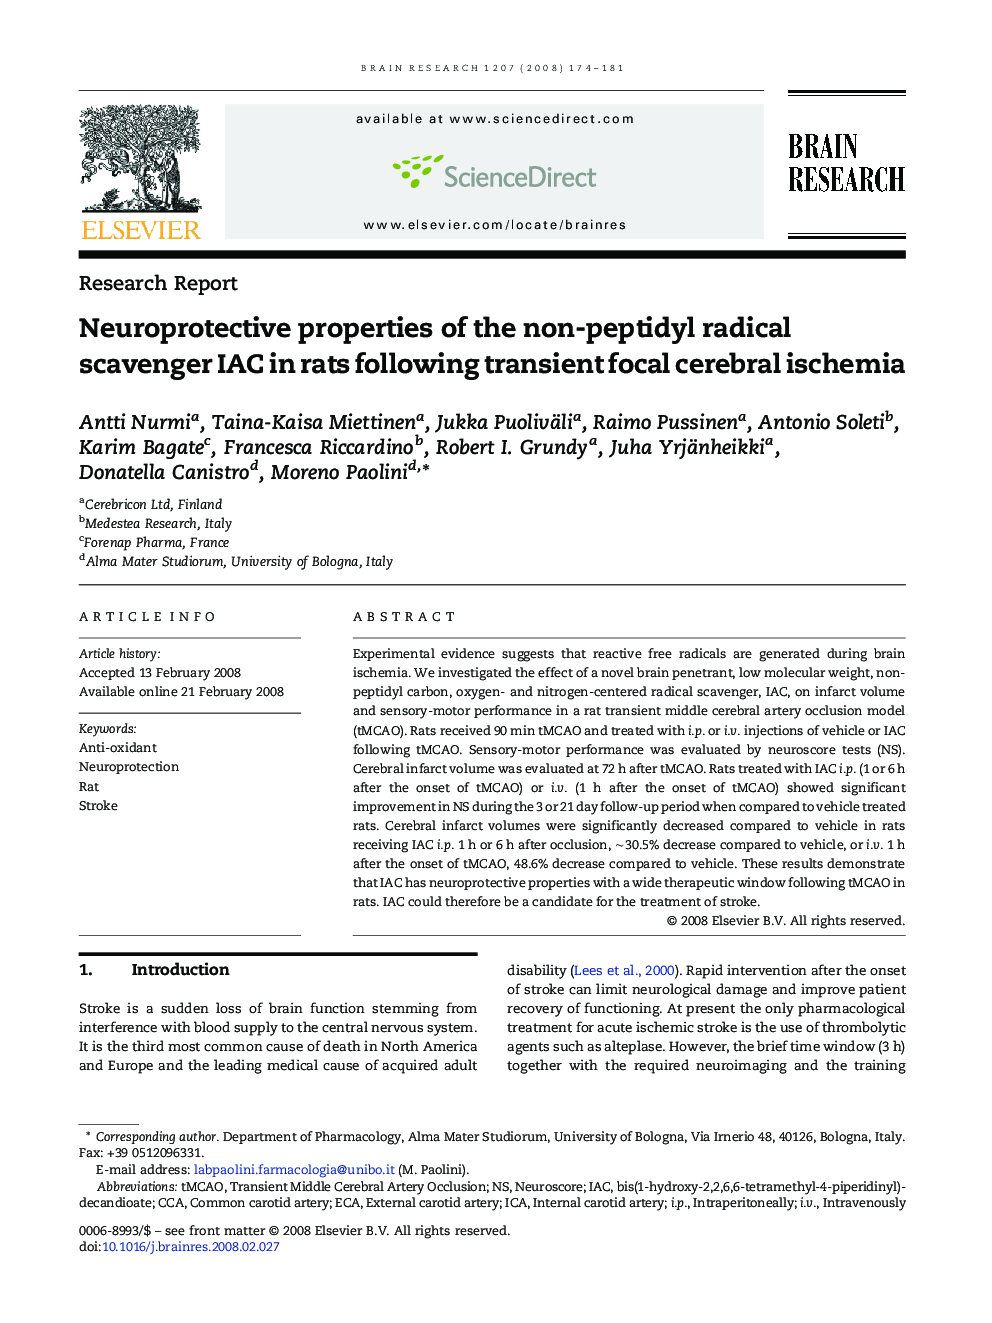 Neuroprotective properties of the non-peptidyl radical scavenger IAC in rats following transient focal cerebral ischemia